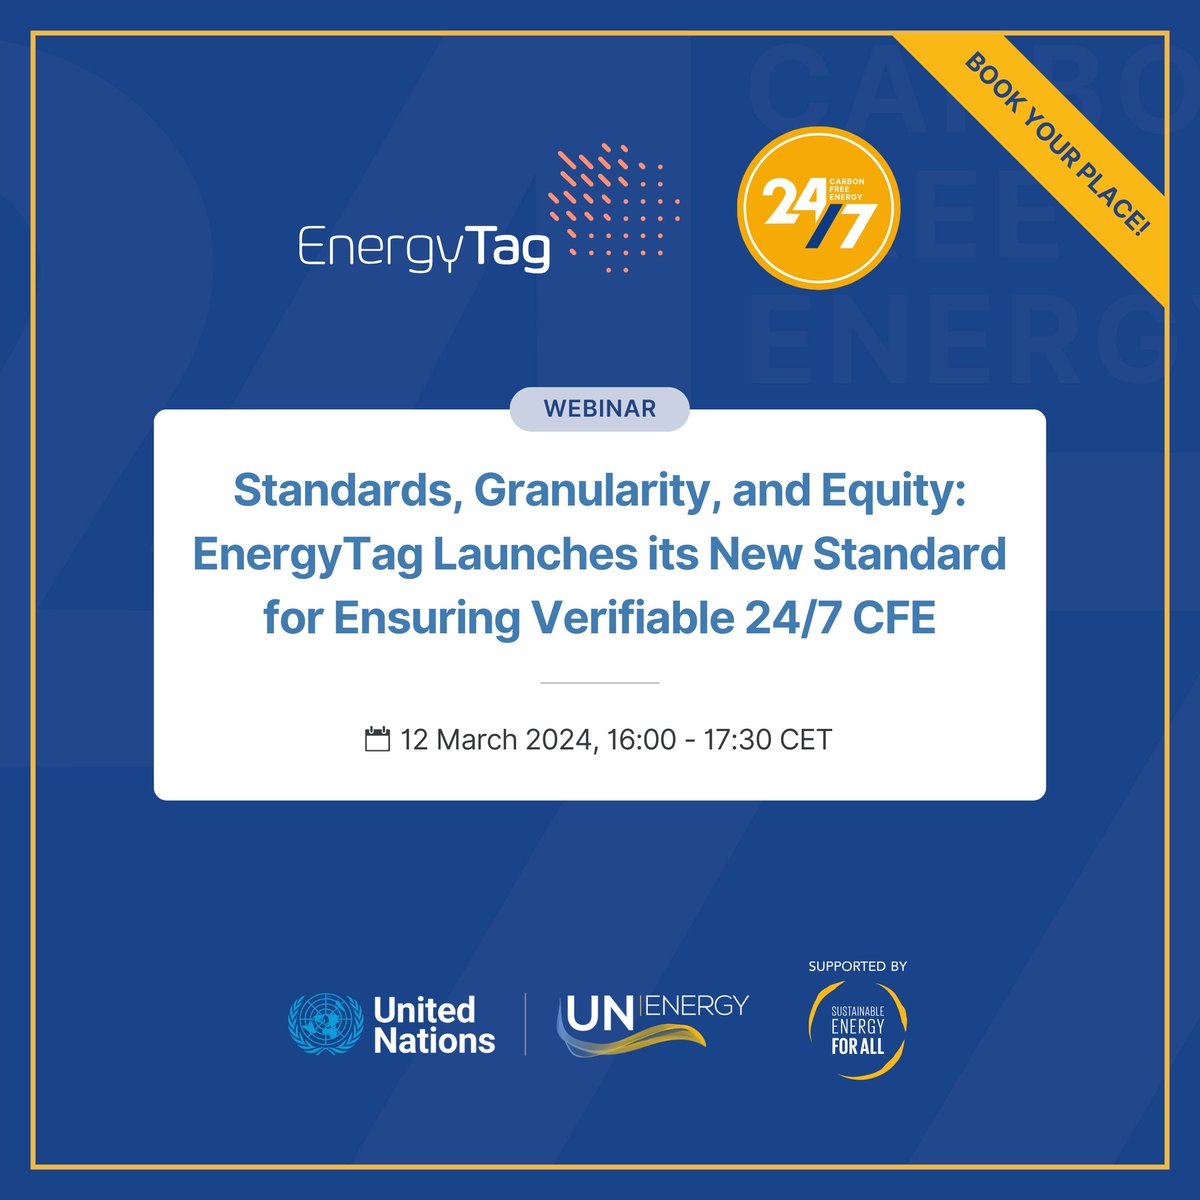 #WebinarAlert Join @UN_Energy and @247CarbonFree for a webinar on standards, granularity, and equity where @energy_tag will launch its new standard for ensuring verifiable 24/7 #carbonfreeenergy. 📆12 March 2024 🕐16:00 - 17:30 CET Register today: ow.ly/JtHo50QAY2p